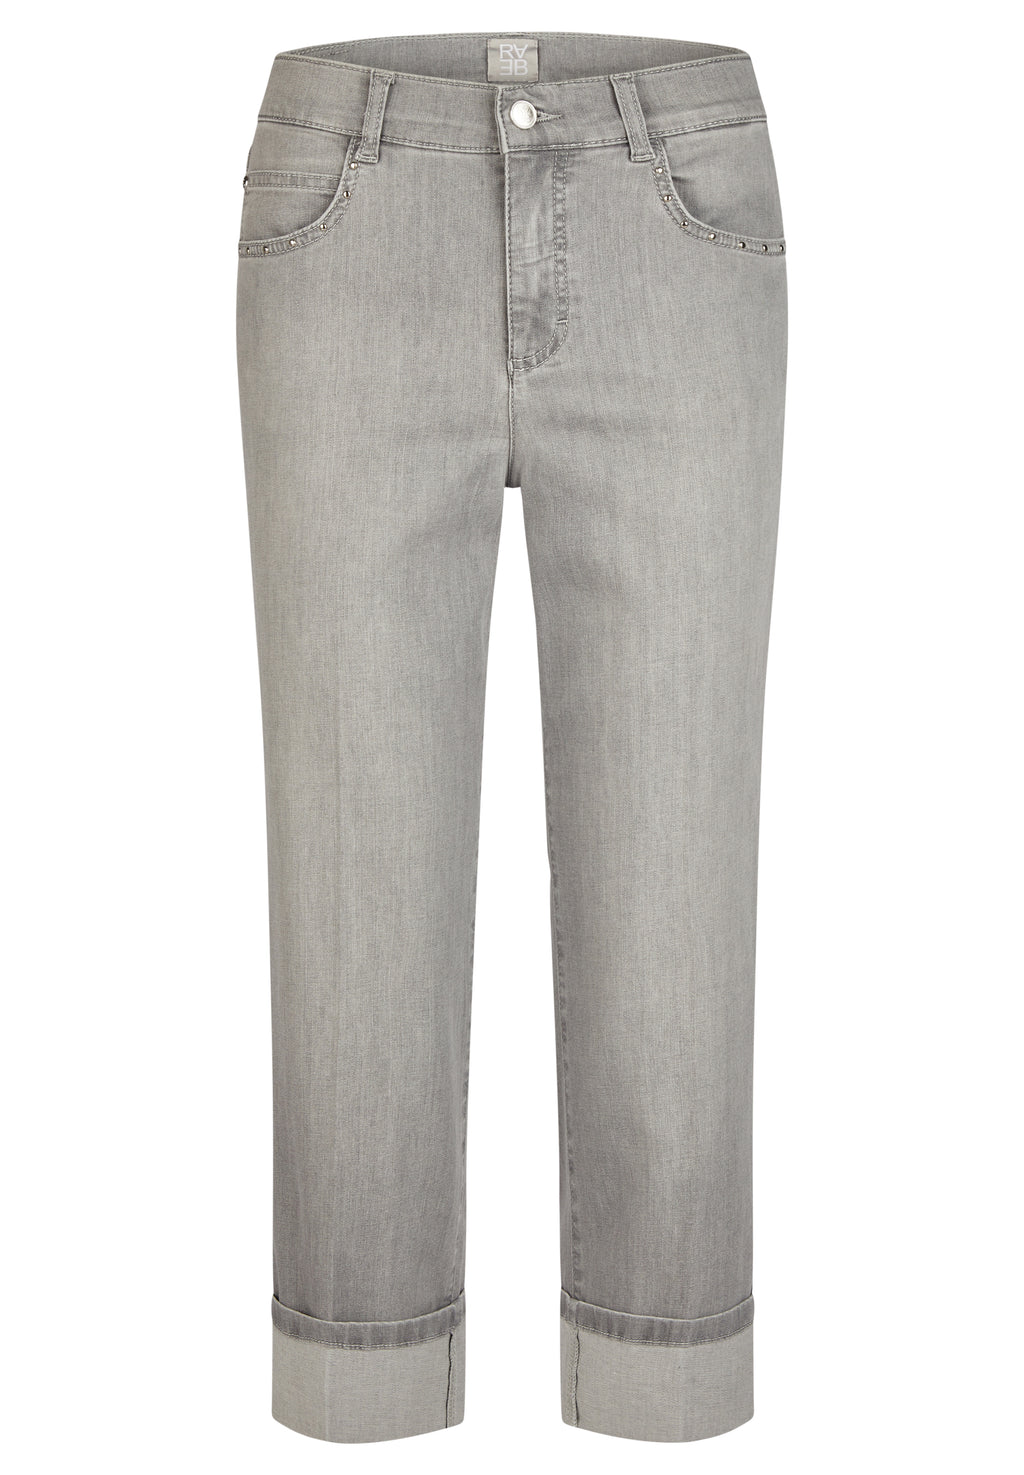 Rabe willow turn up jeans in light grey, product code 52-213151